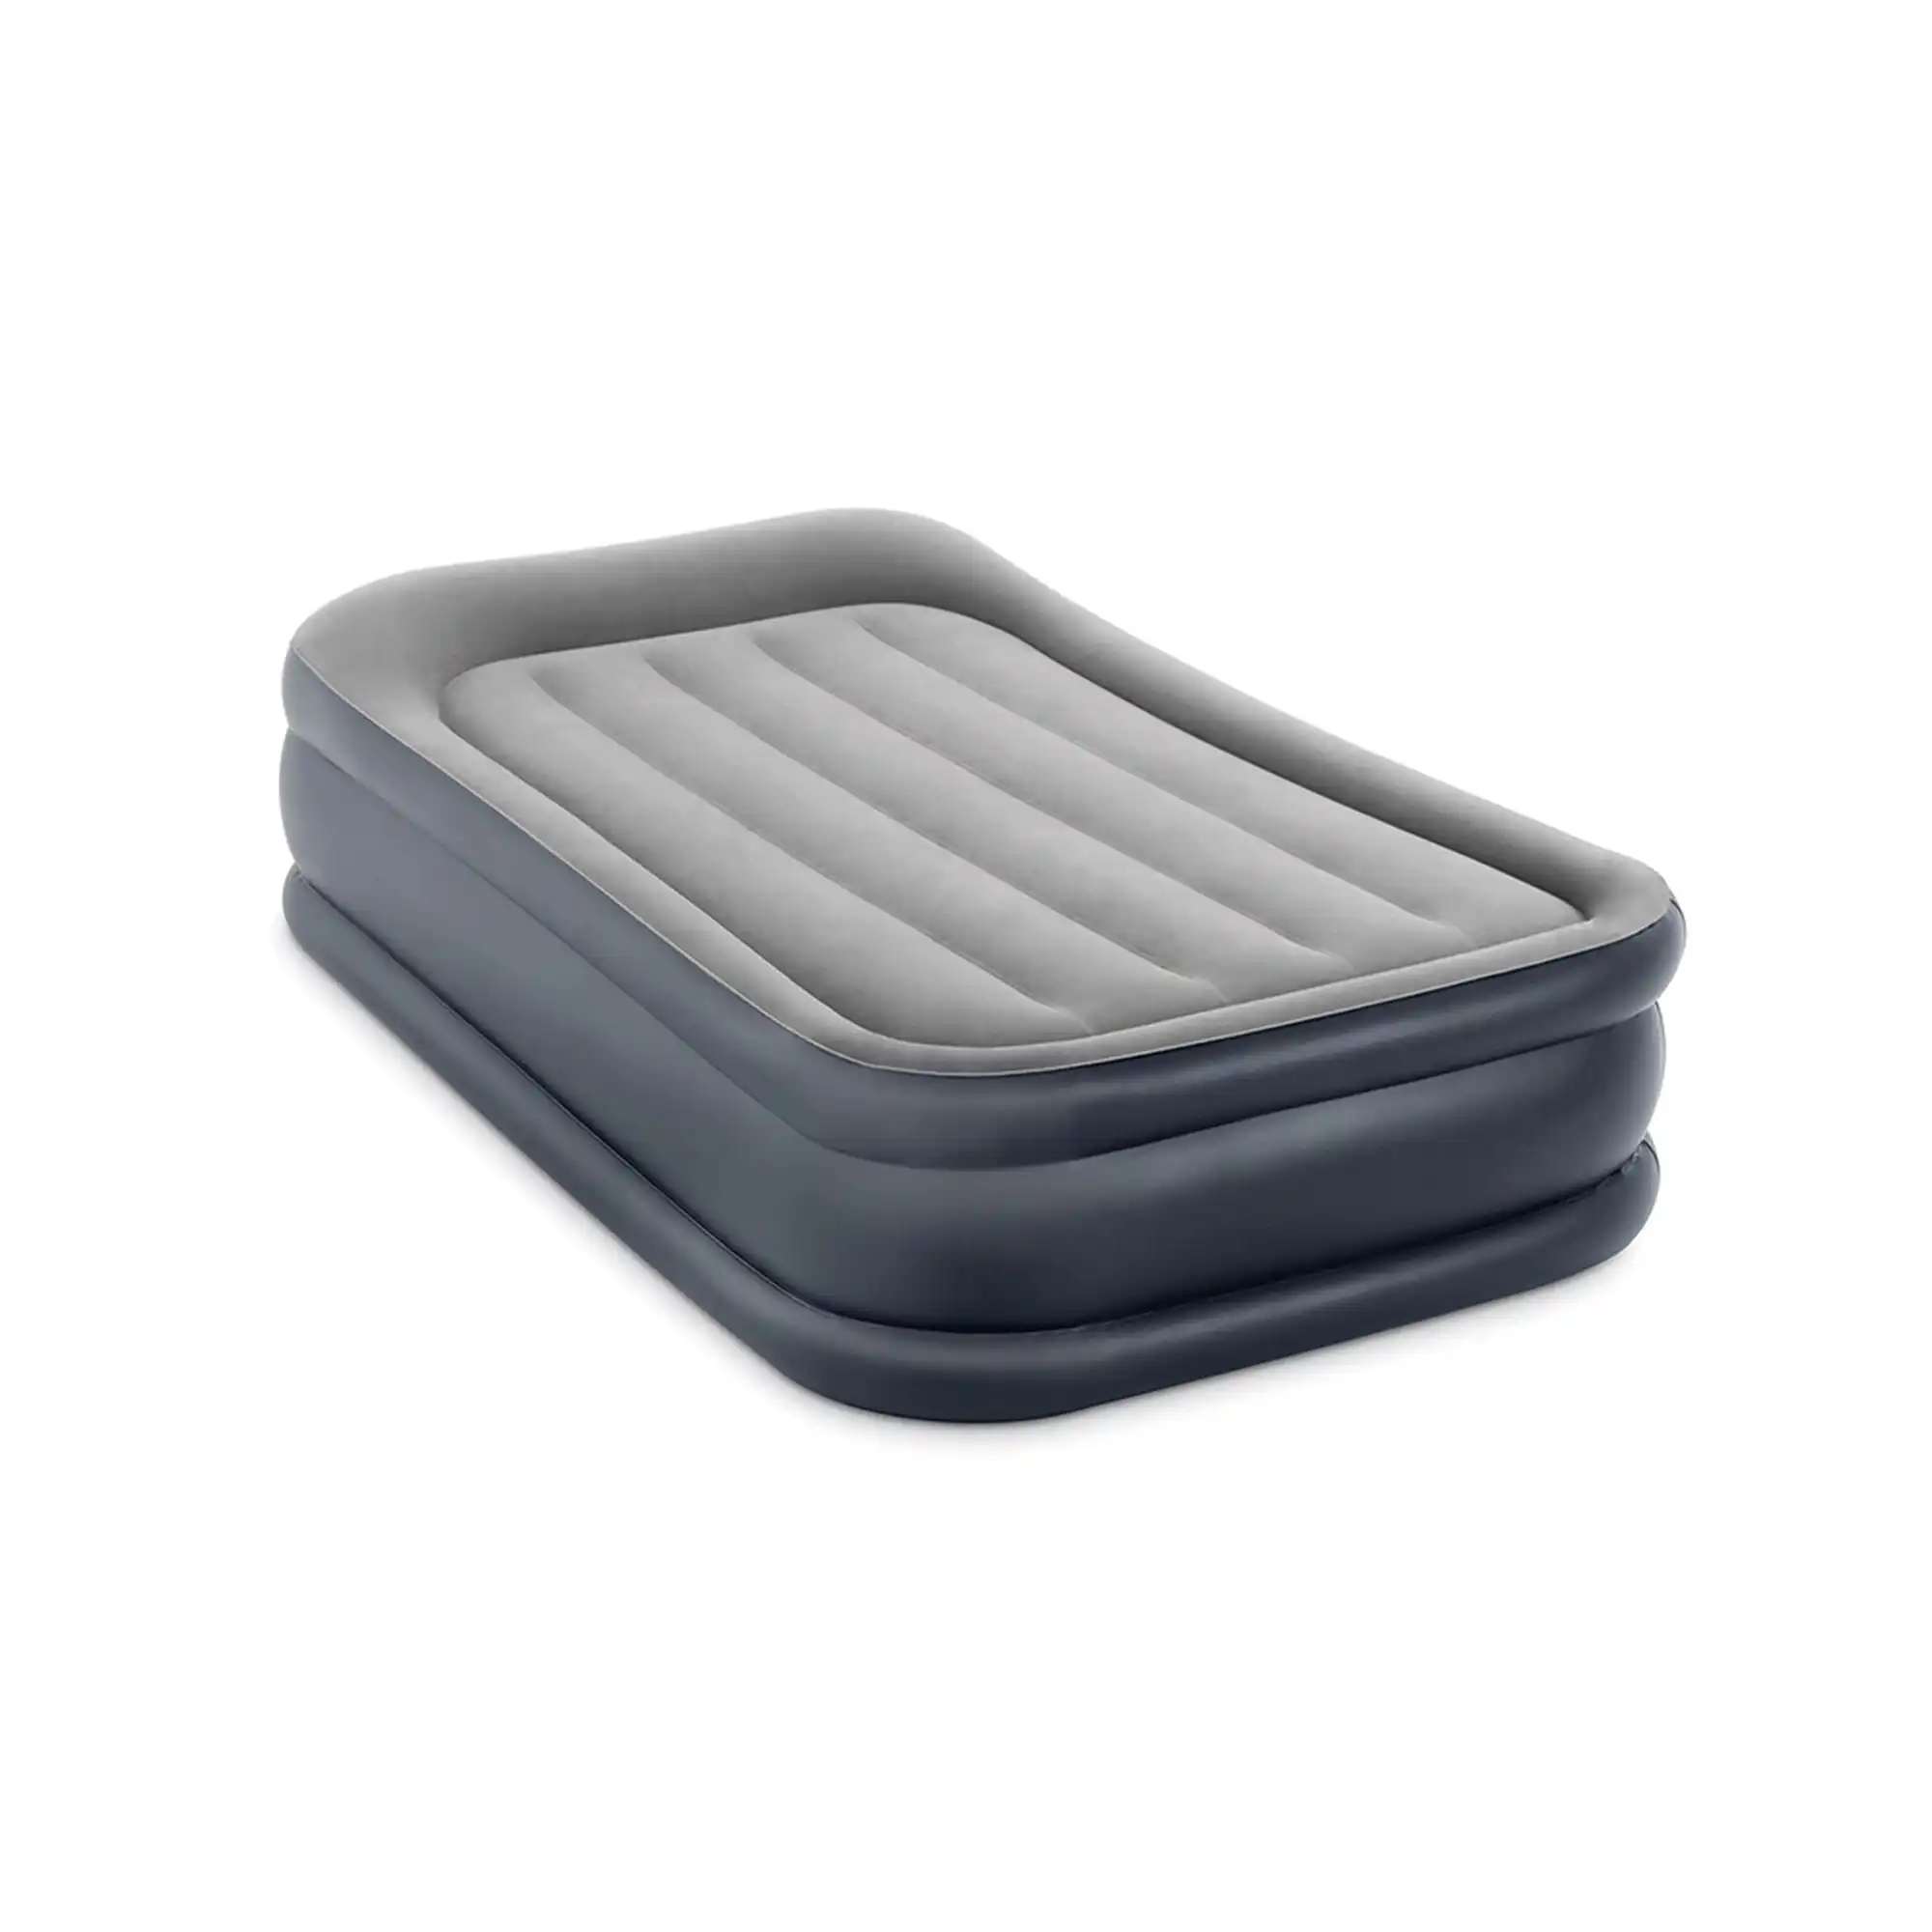 Twin Deluxe Pillow Rest Airbed